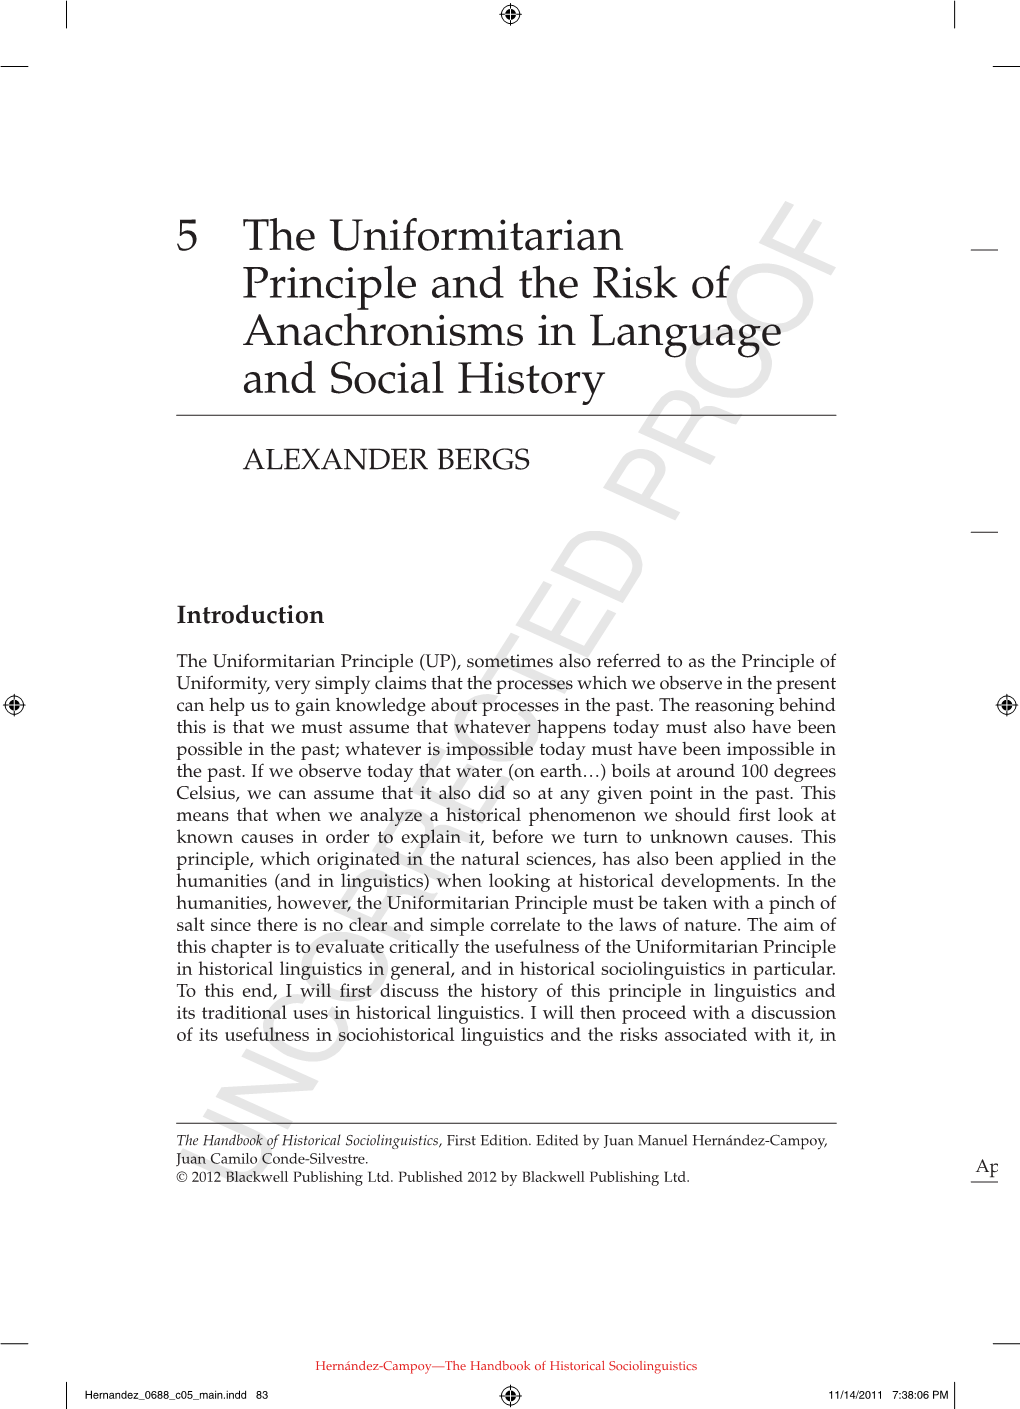 5 the Uniformitarian Principle and the Risk of Anachronisms in Language and Social History